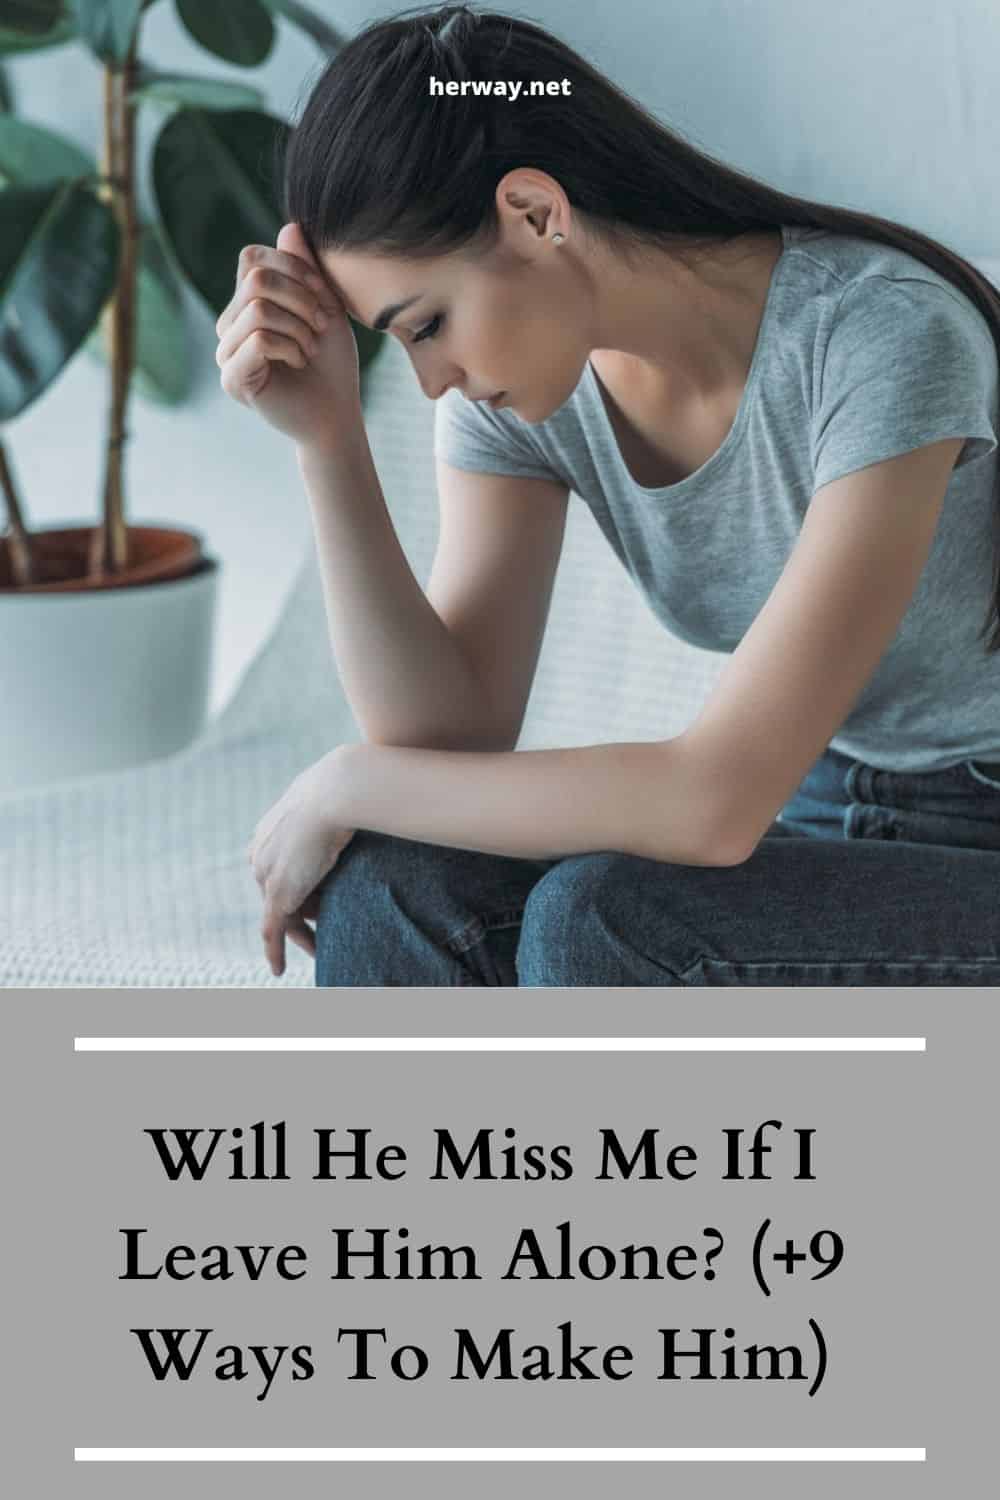 Will He Miss Me If I Leave Him Alone (+9 Ways To Make Him)